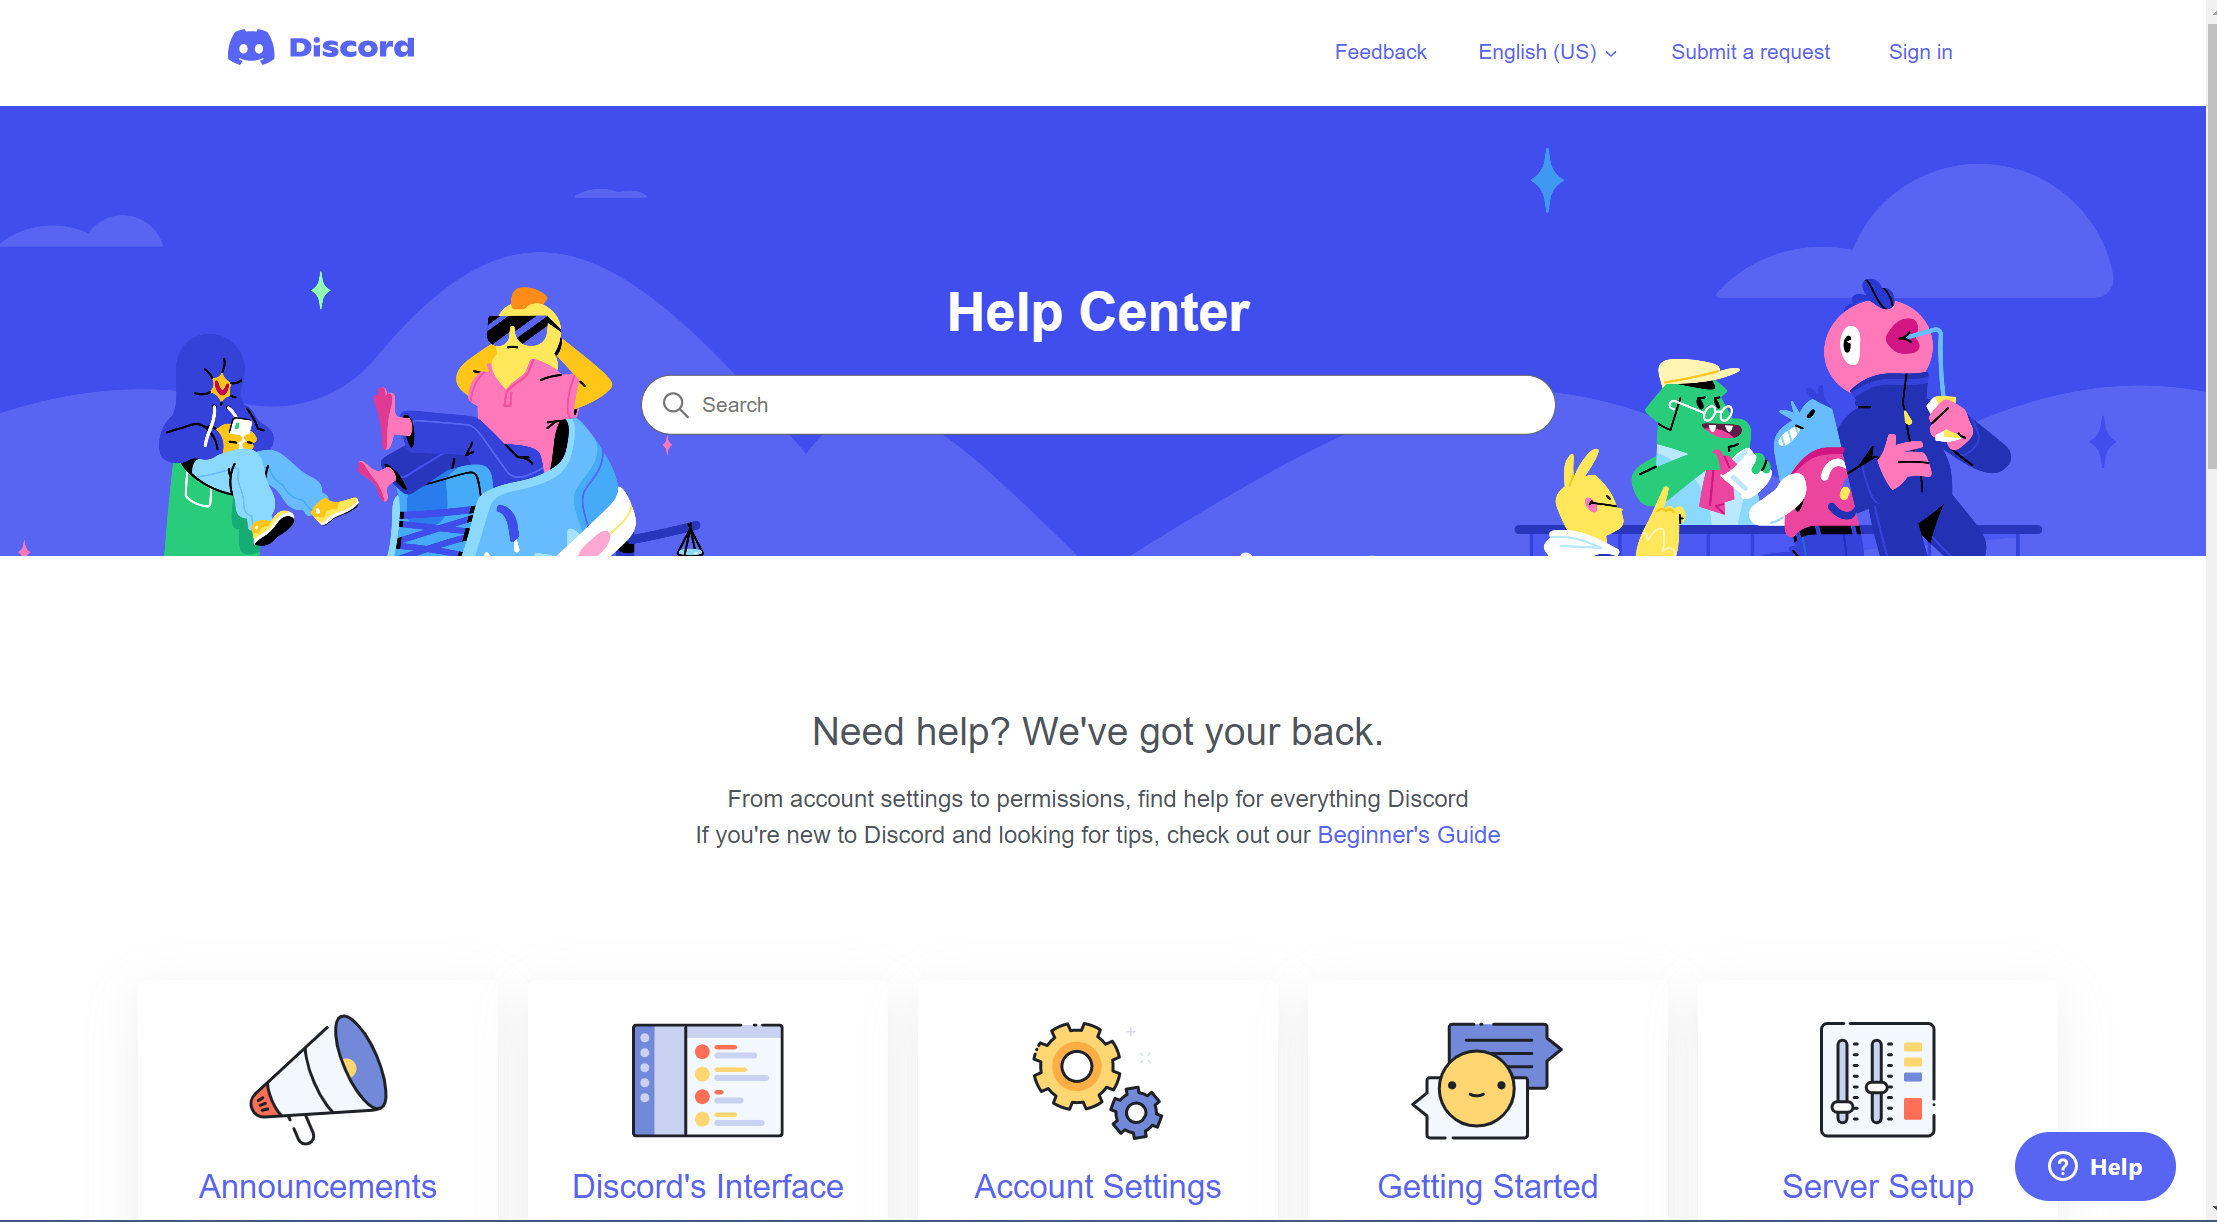 Go to the Support and Help Center of Discord